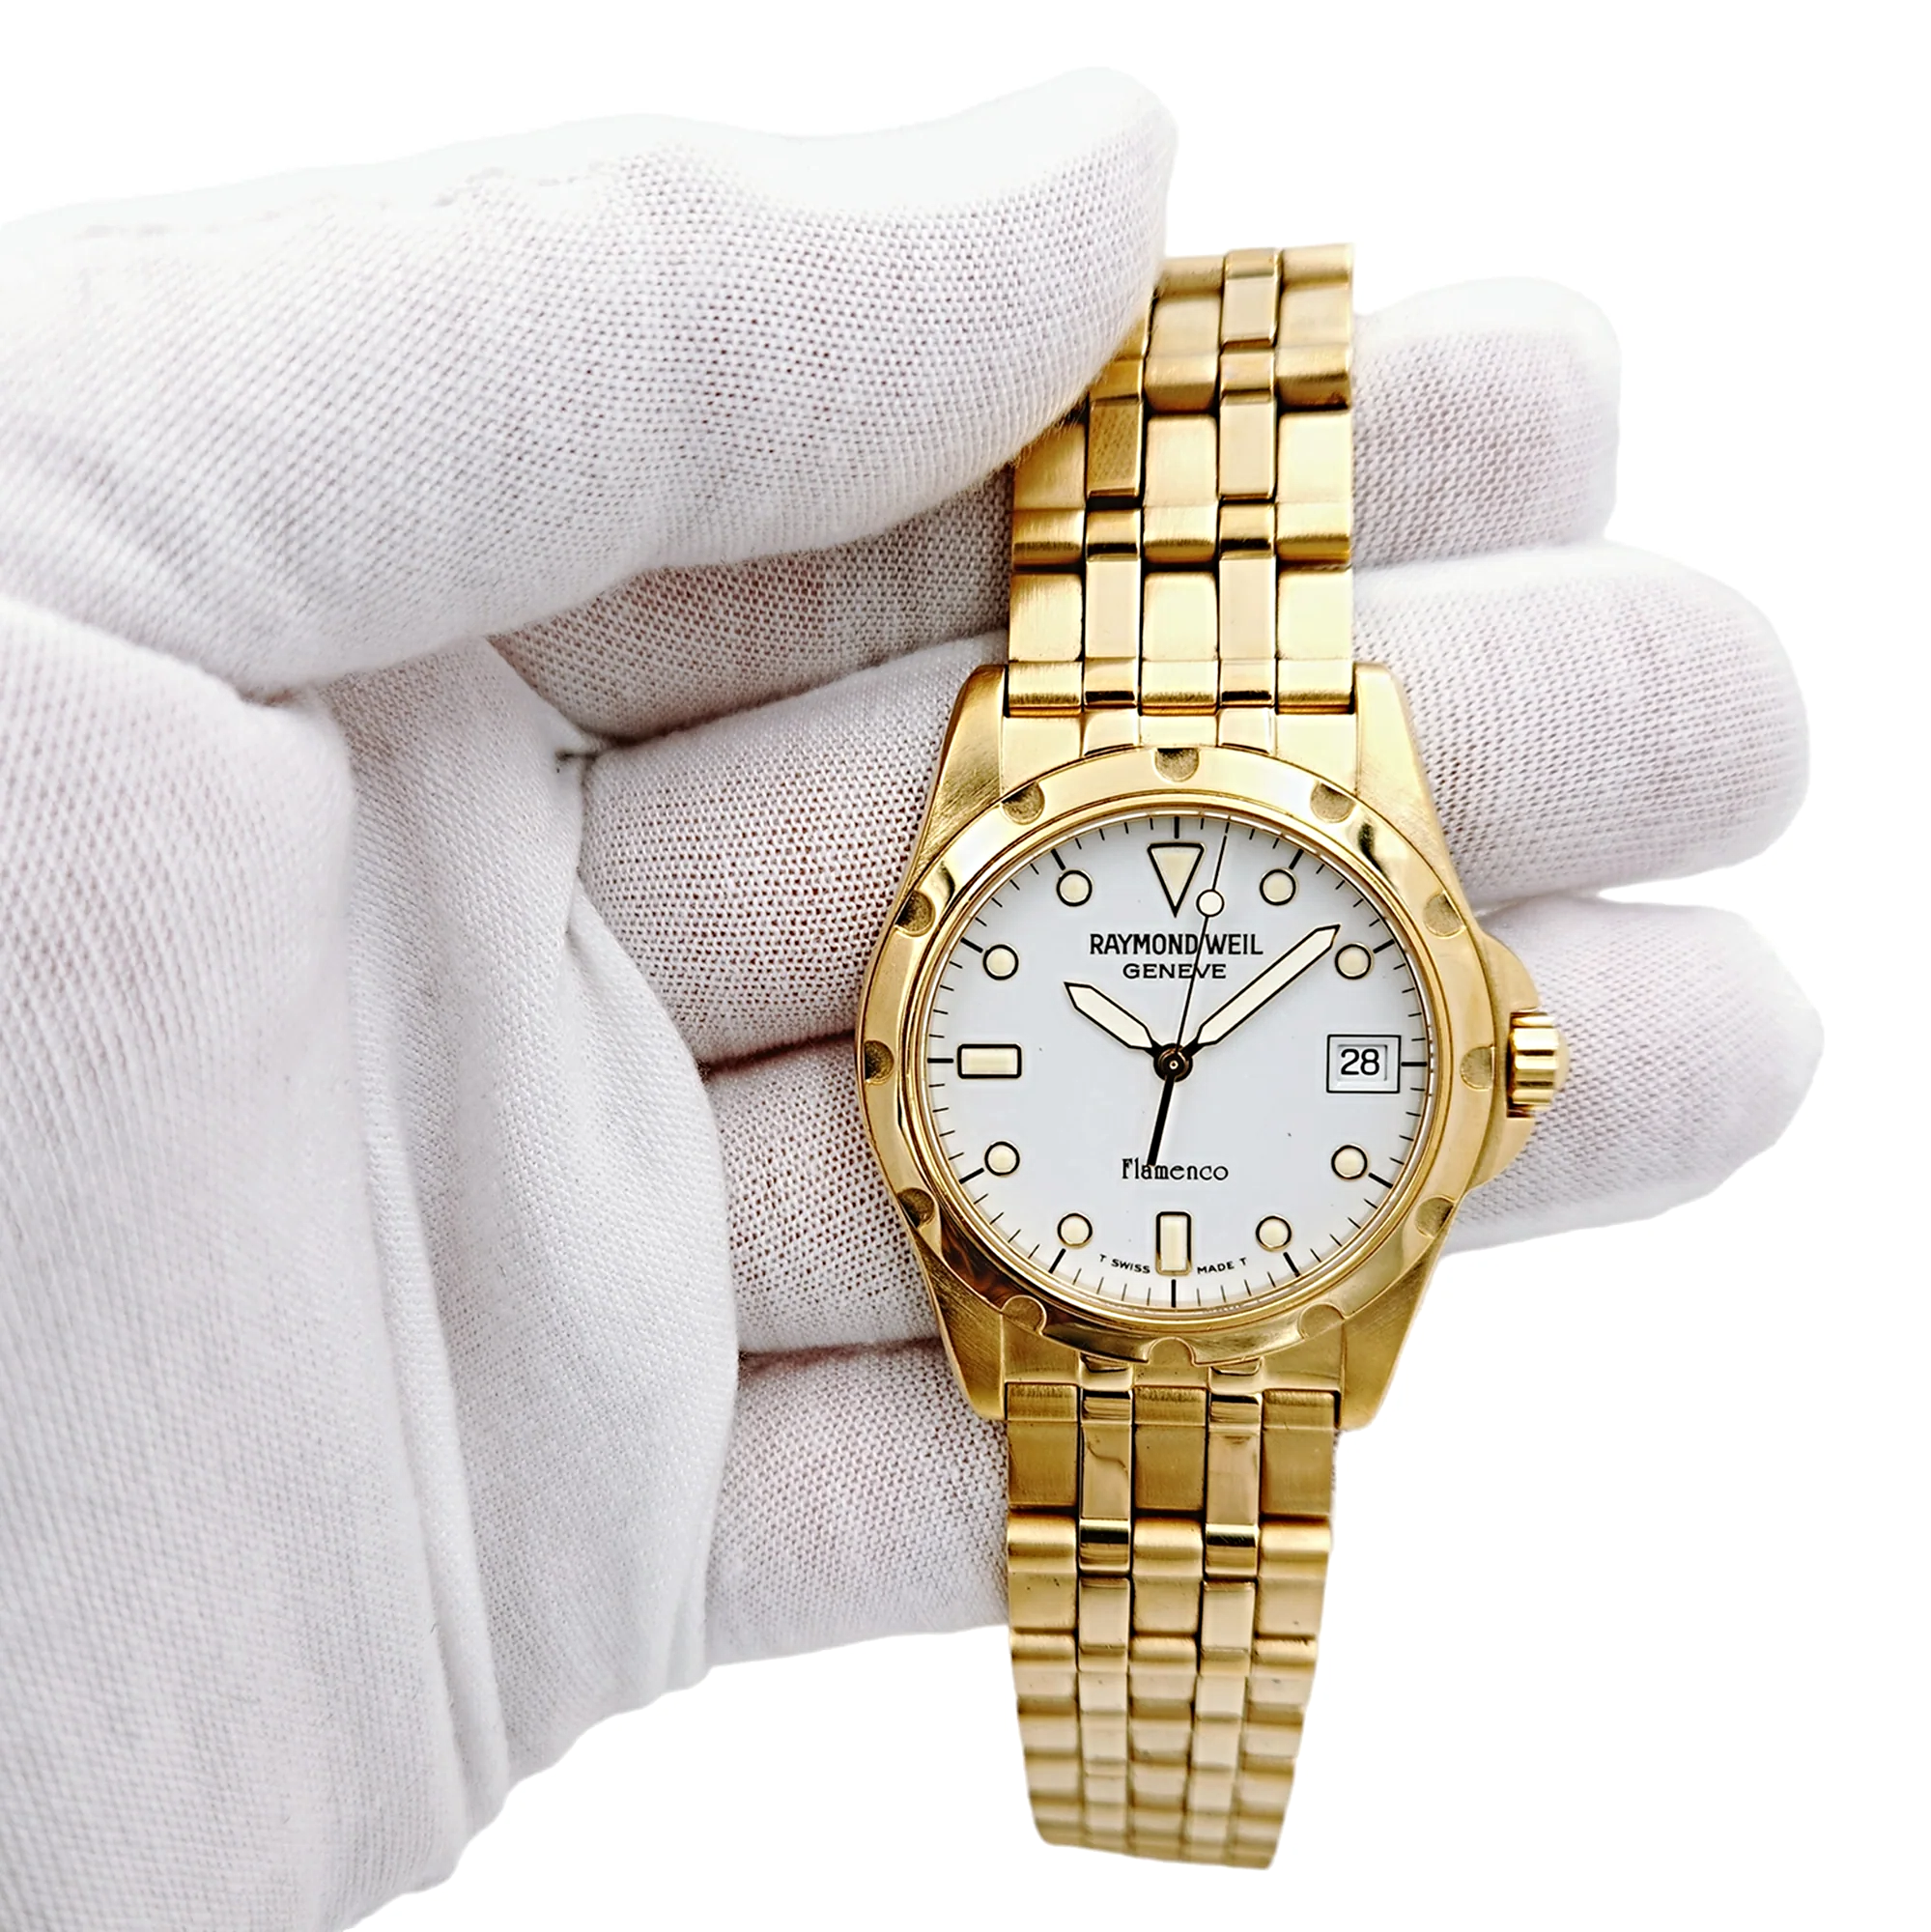 Men's Raymond Weil 36mm Flamenco Gold Plated Watch with White Dial. (Pre-Owned 5570)